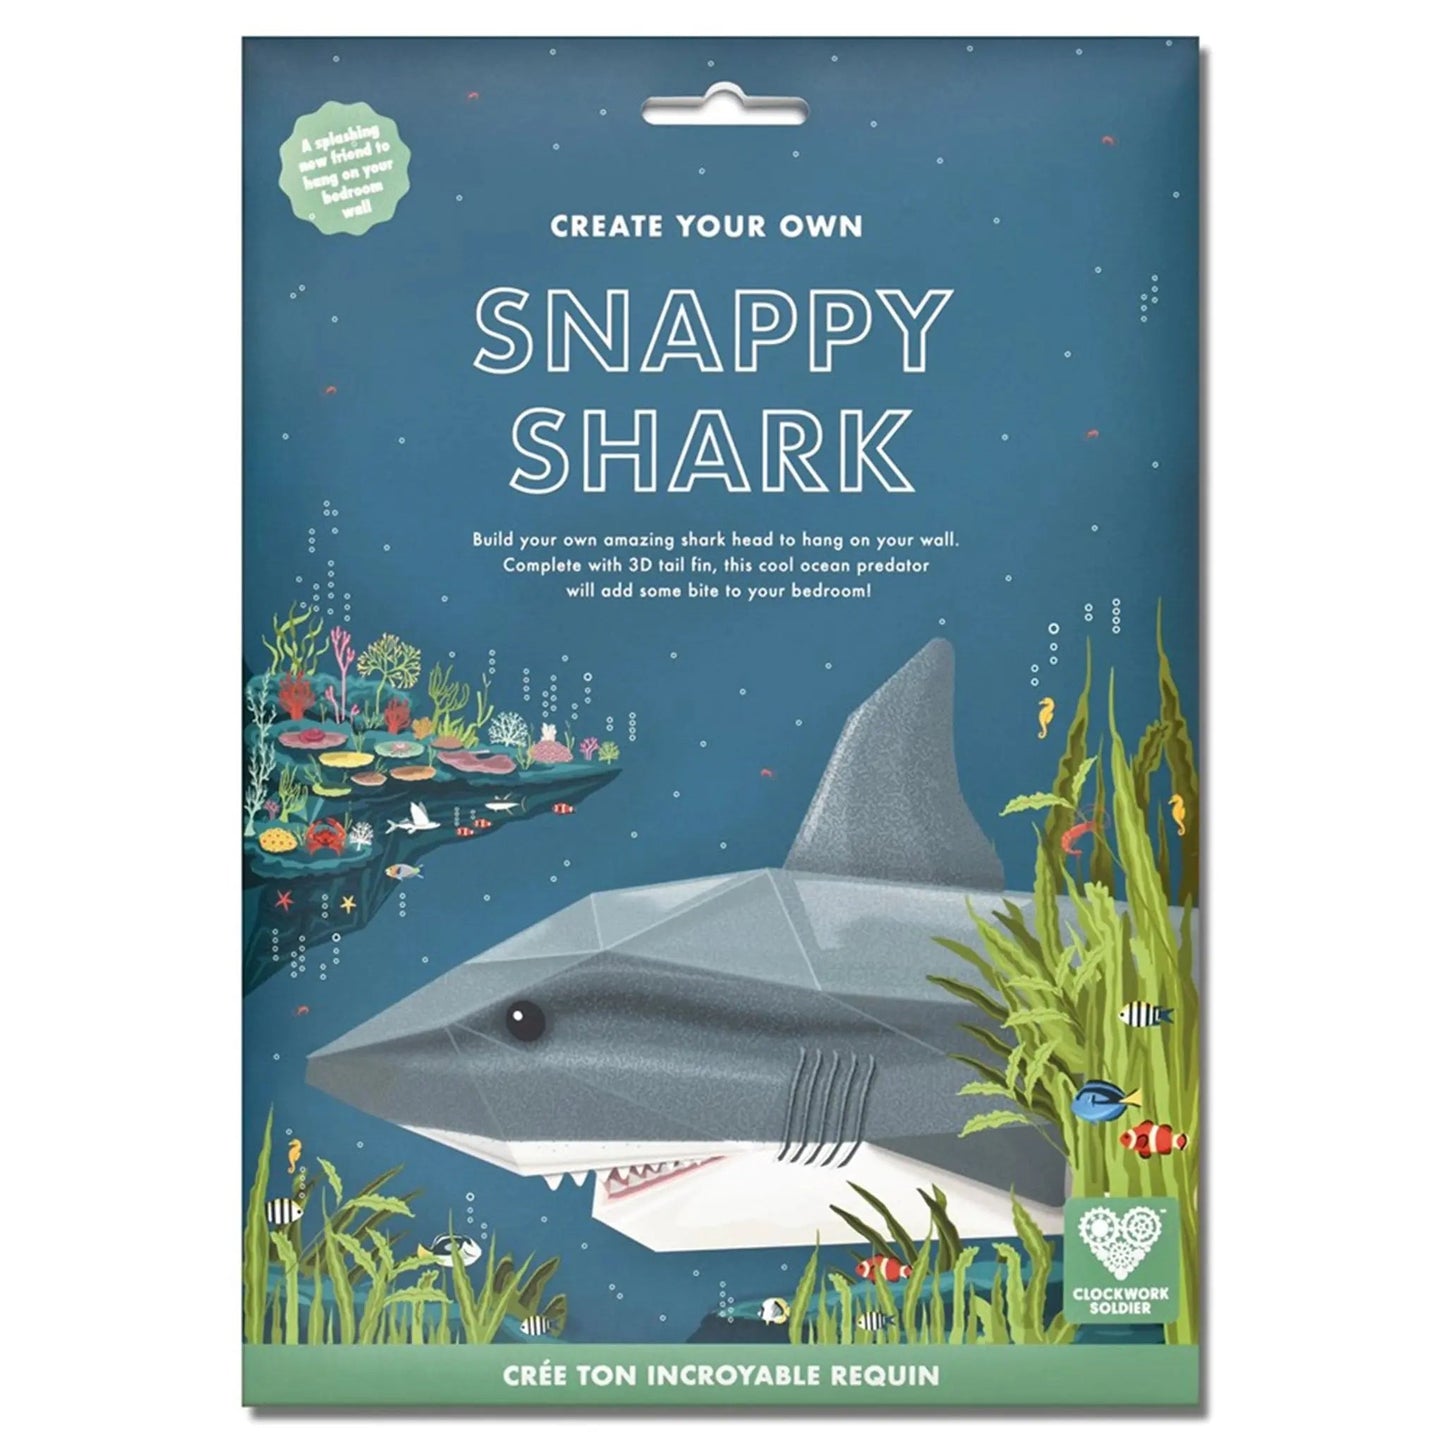 Create your own Snappy Shark - Clockwork Soldier - The Forgotten Toy Shop